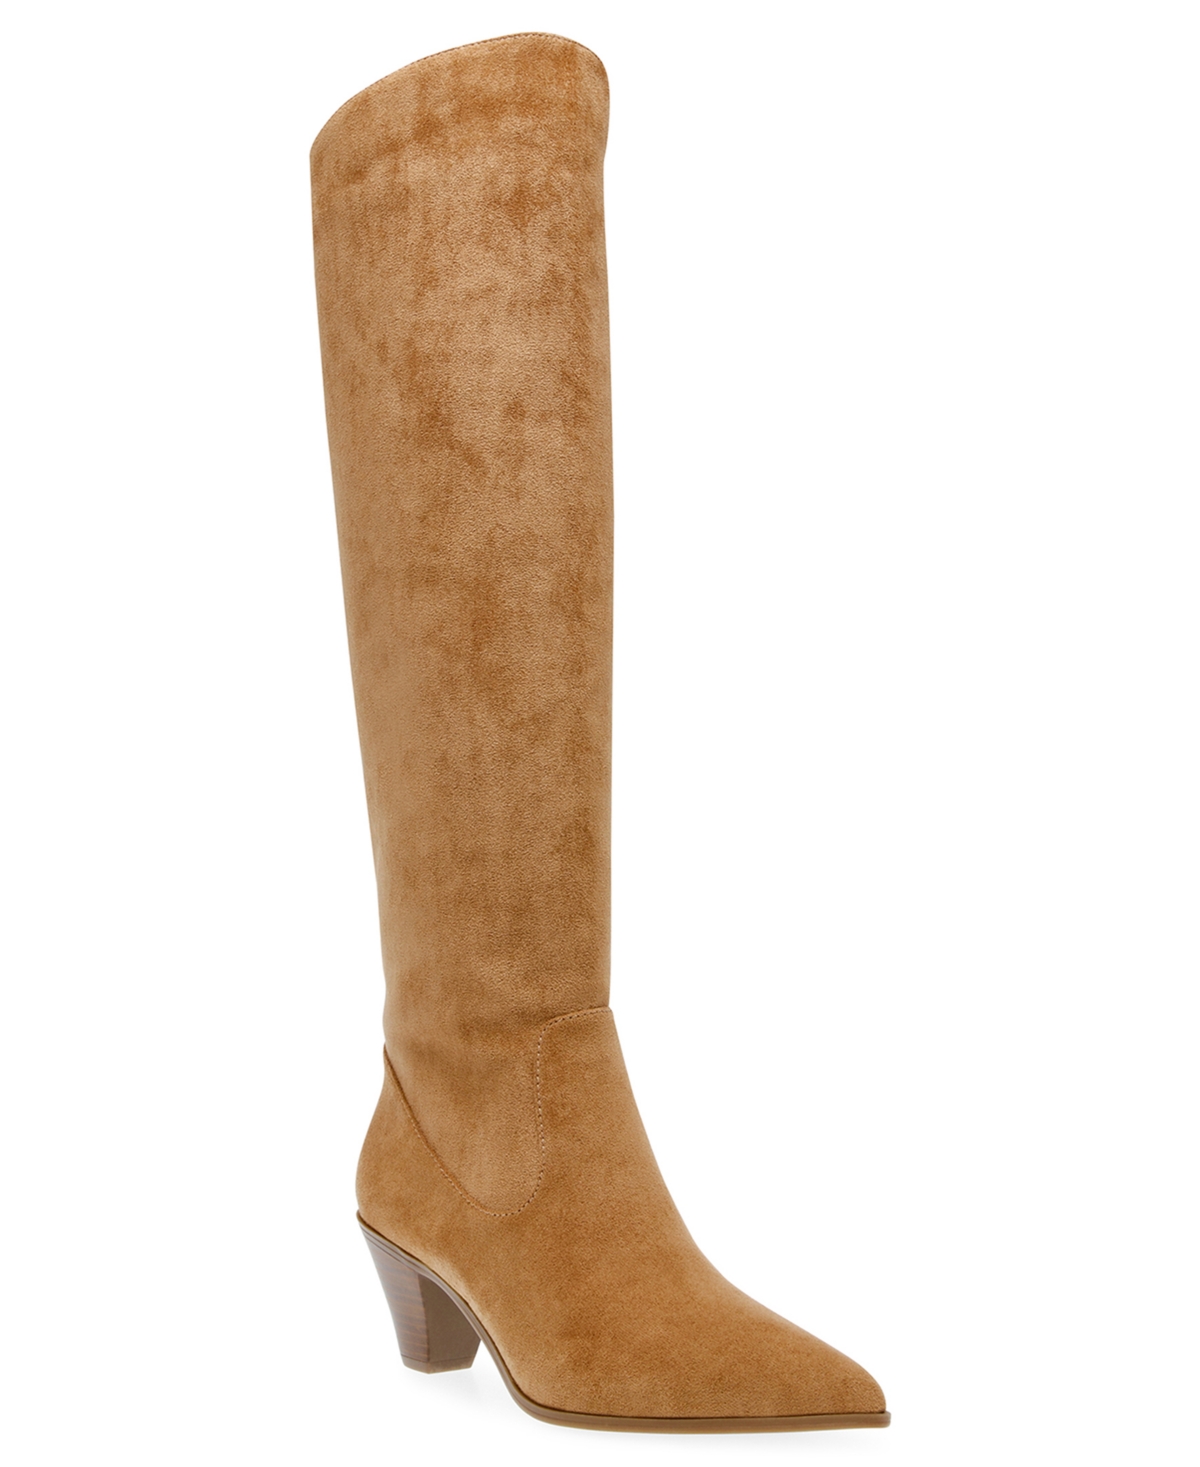 Women's Ware Pointed Toe Knee High Boots - Dark Natural Microsuede